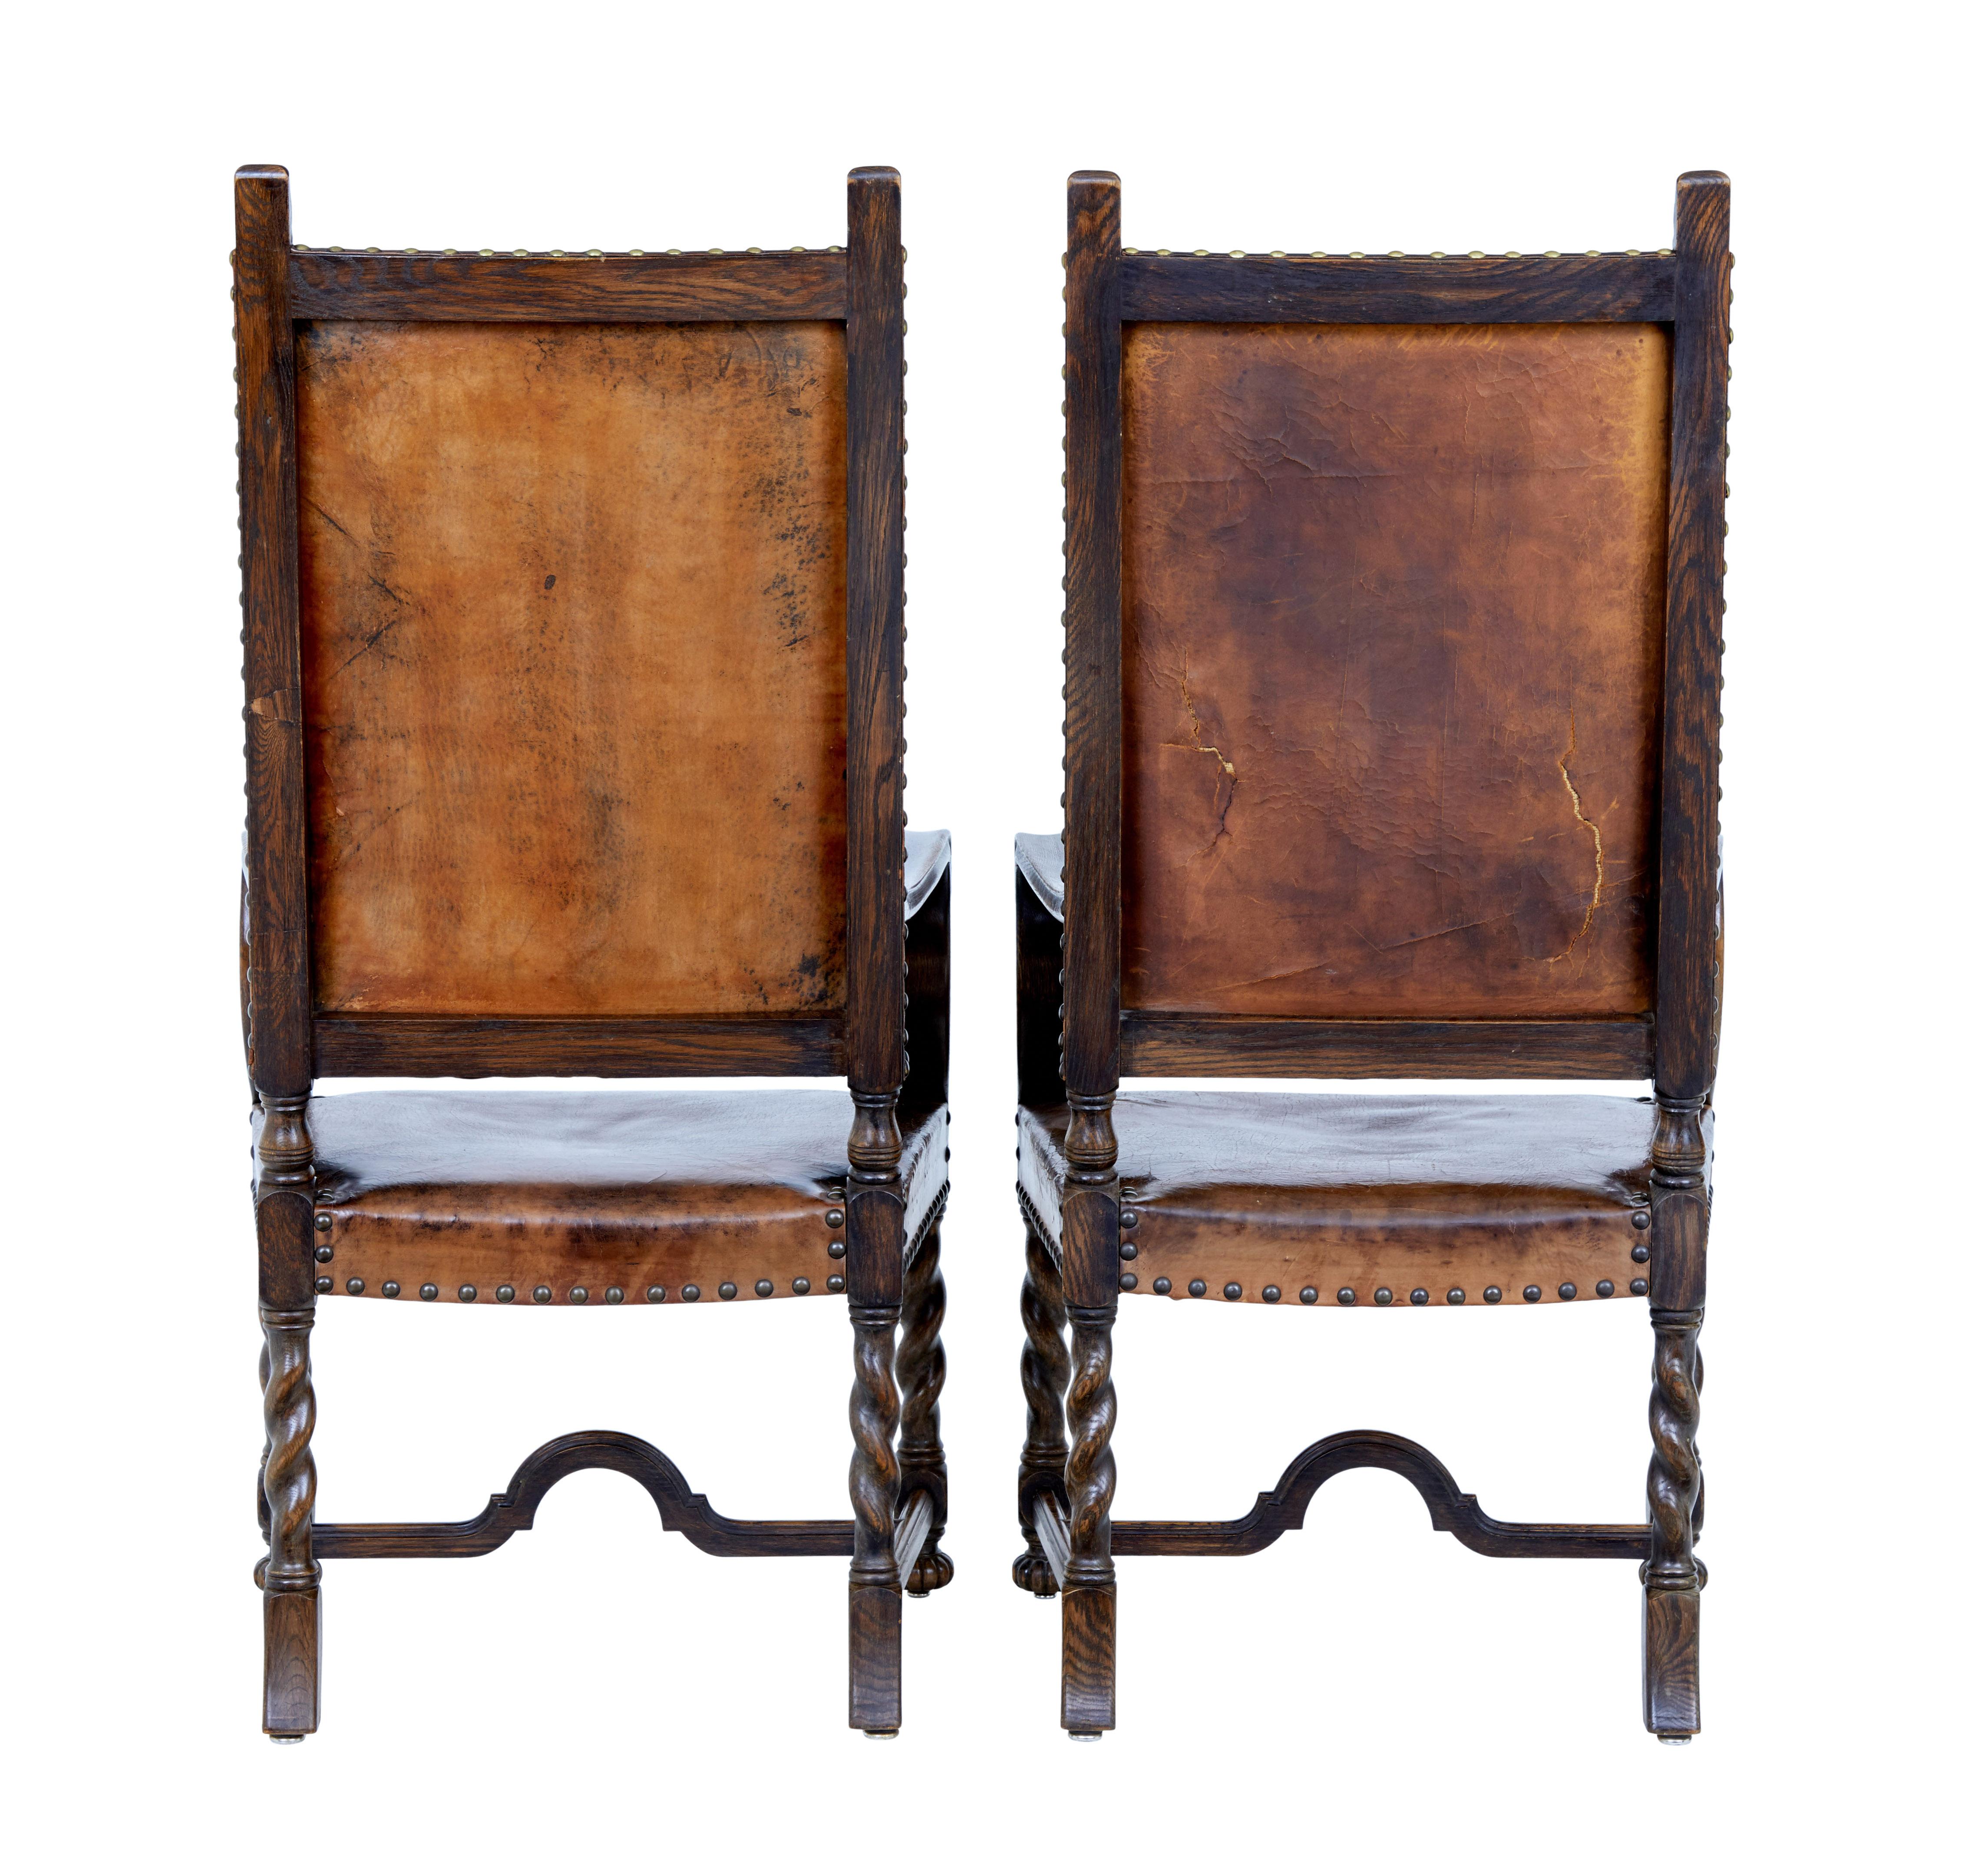 Baroque Revival Pair of 19th Century Carved Oak Leather Armchairs